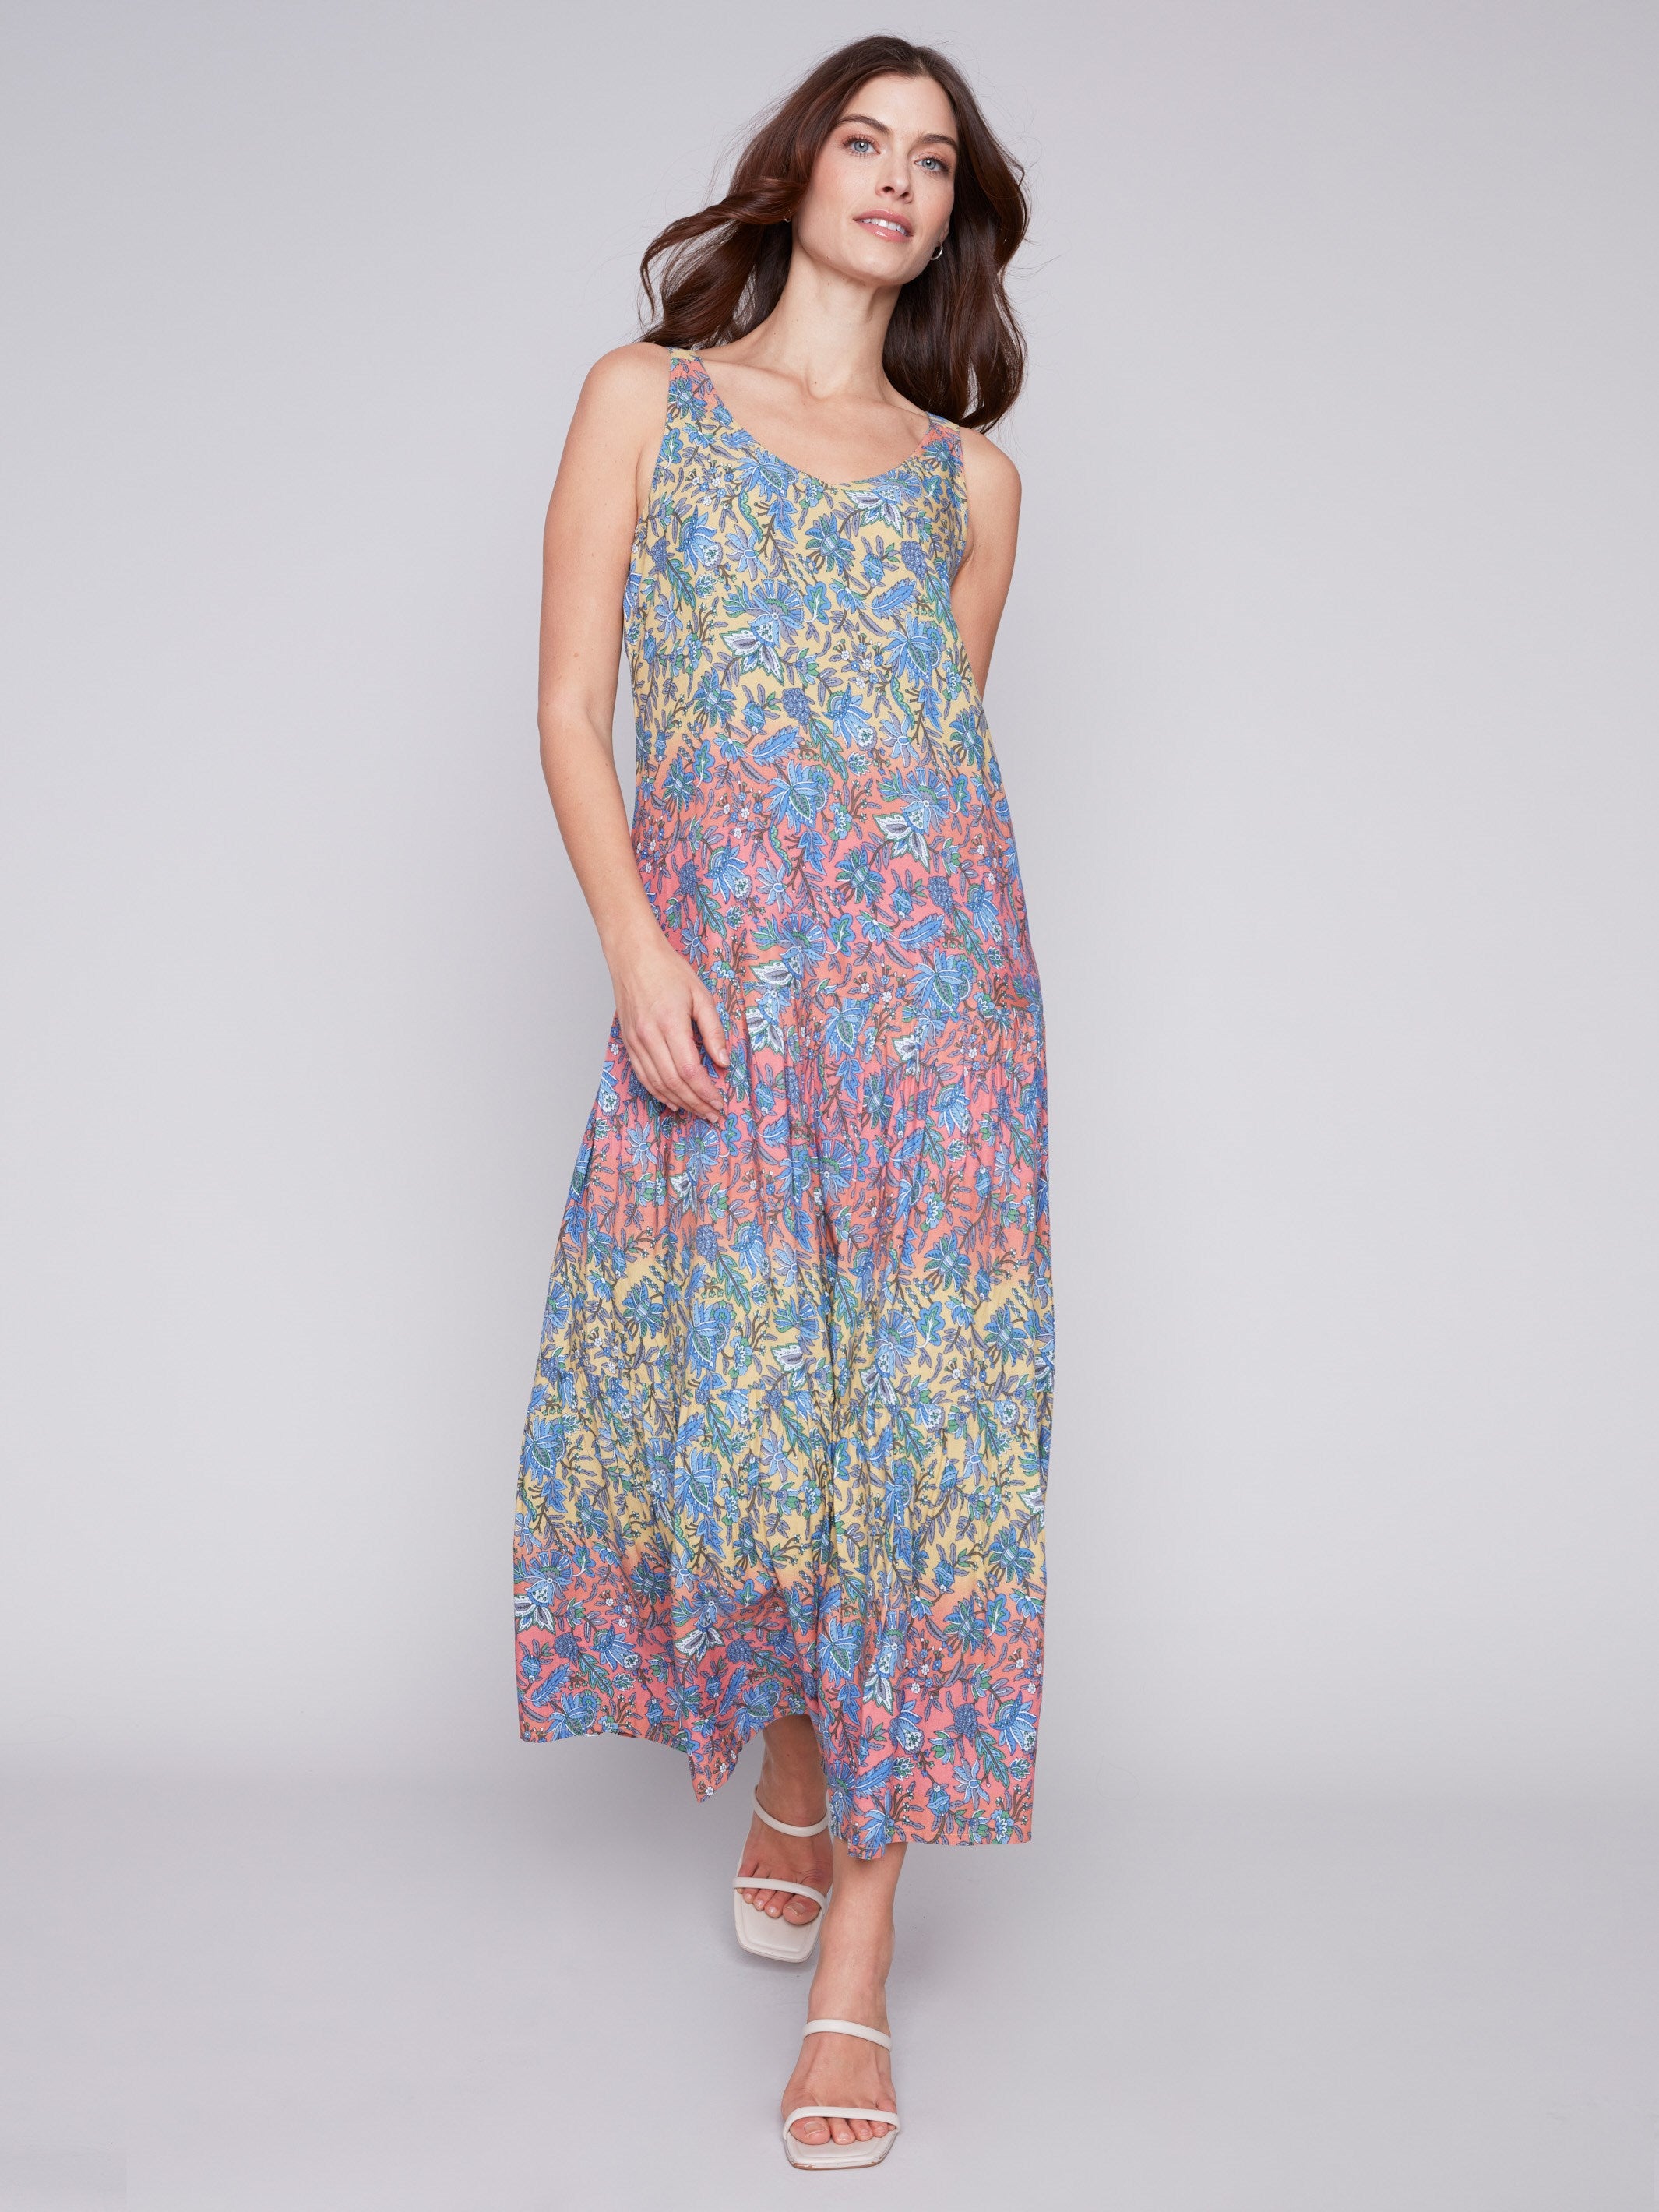 Printed Tiered Maxi Dress - Glory - Charlie B Collection Canada - Image 3